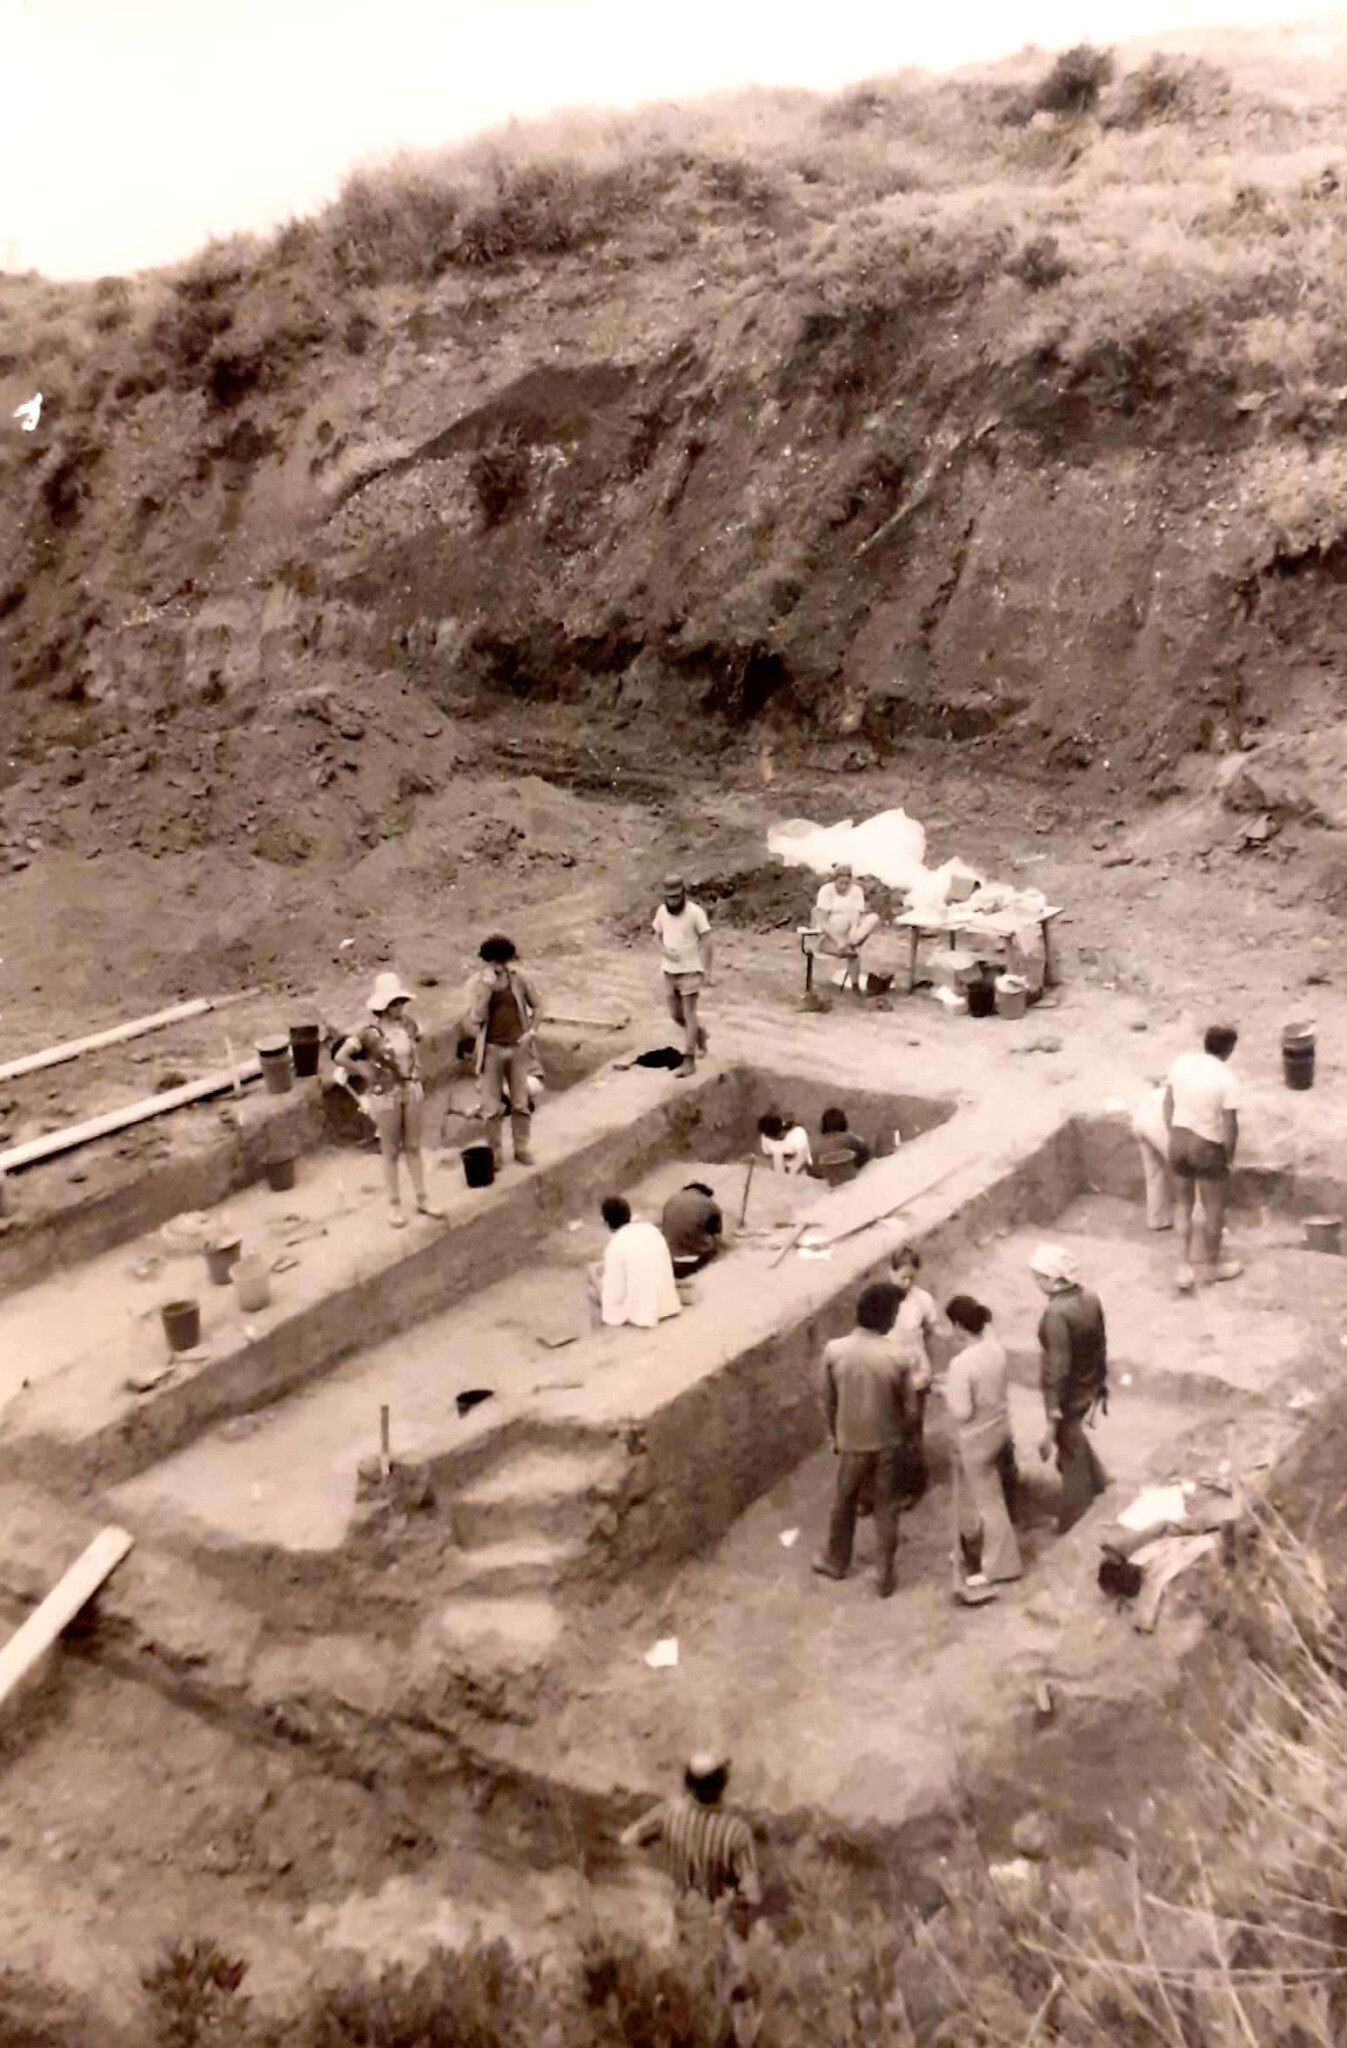 an archival photo of many people on an archeological dig